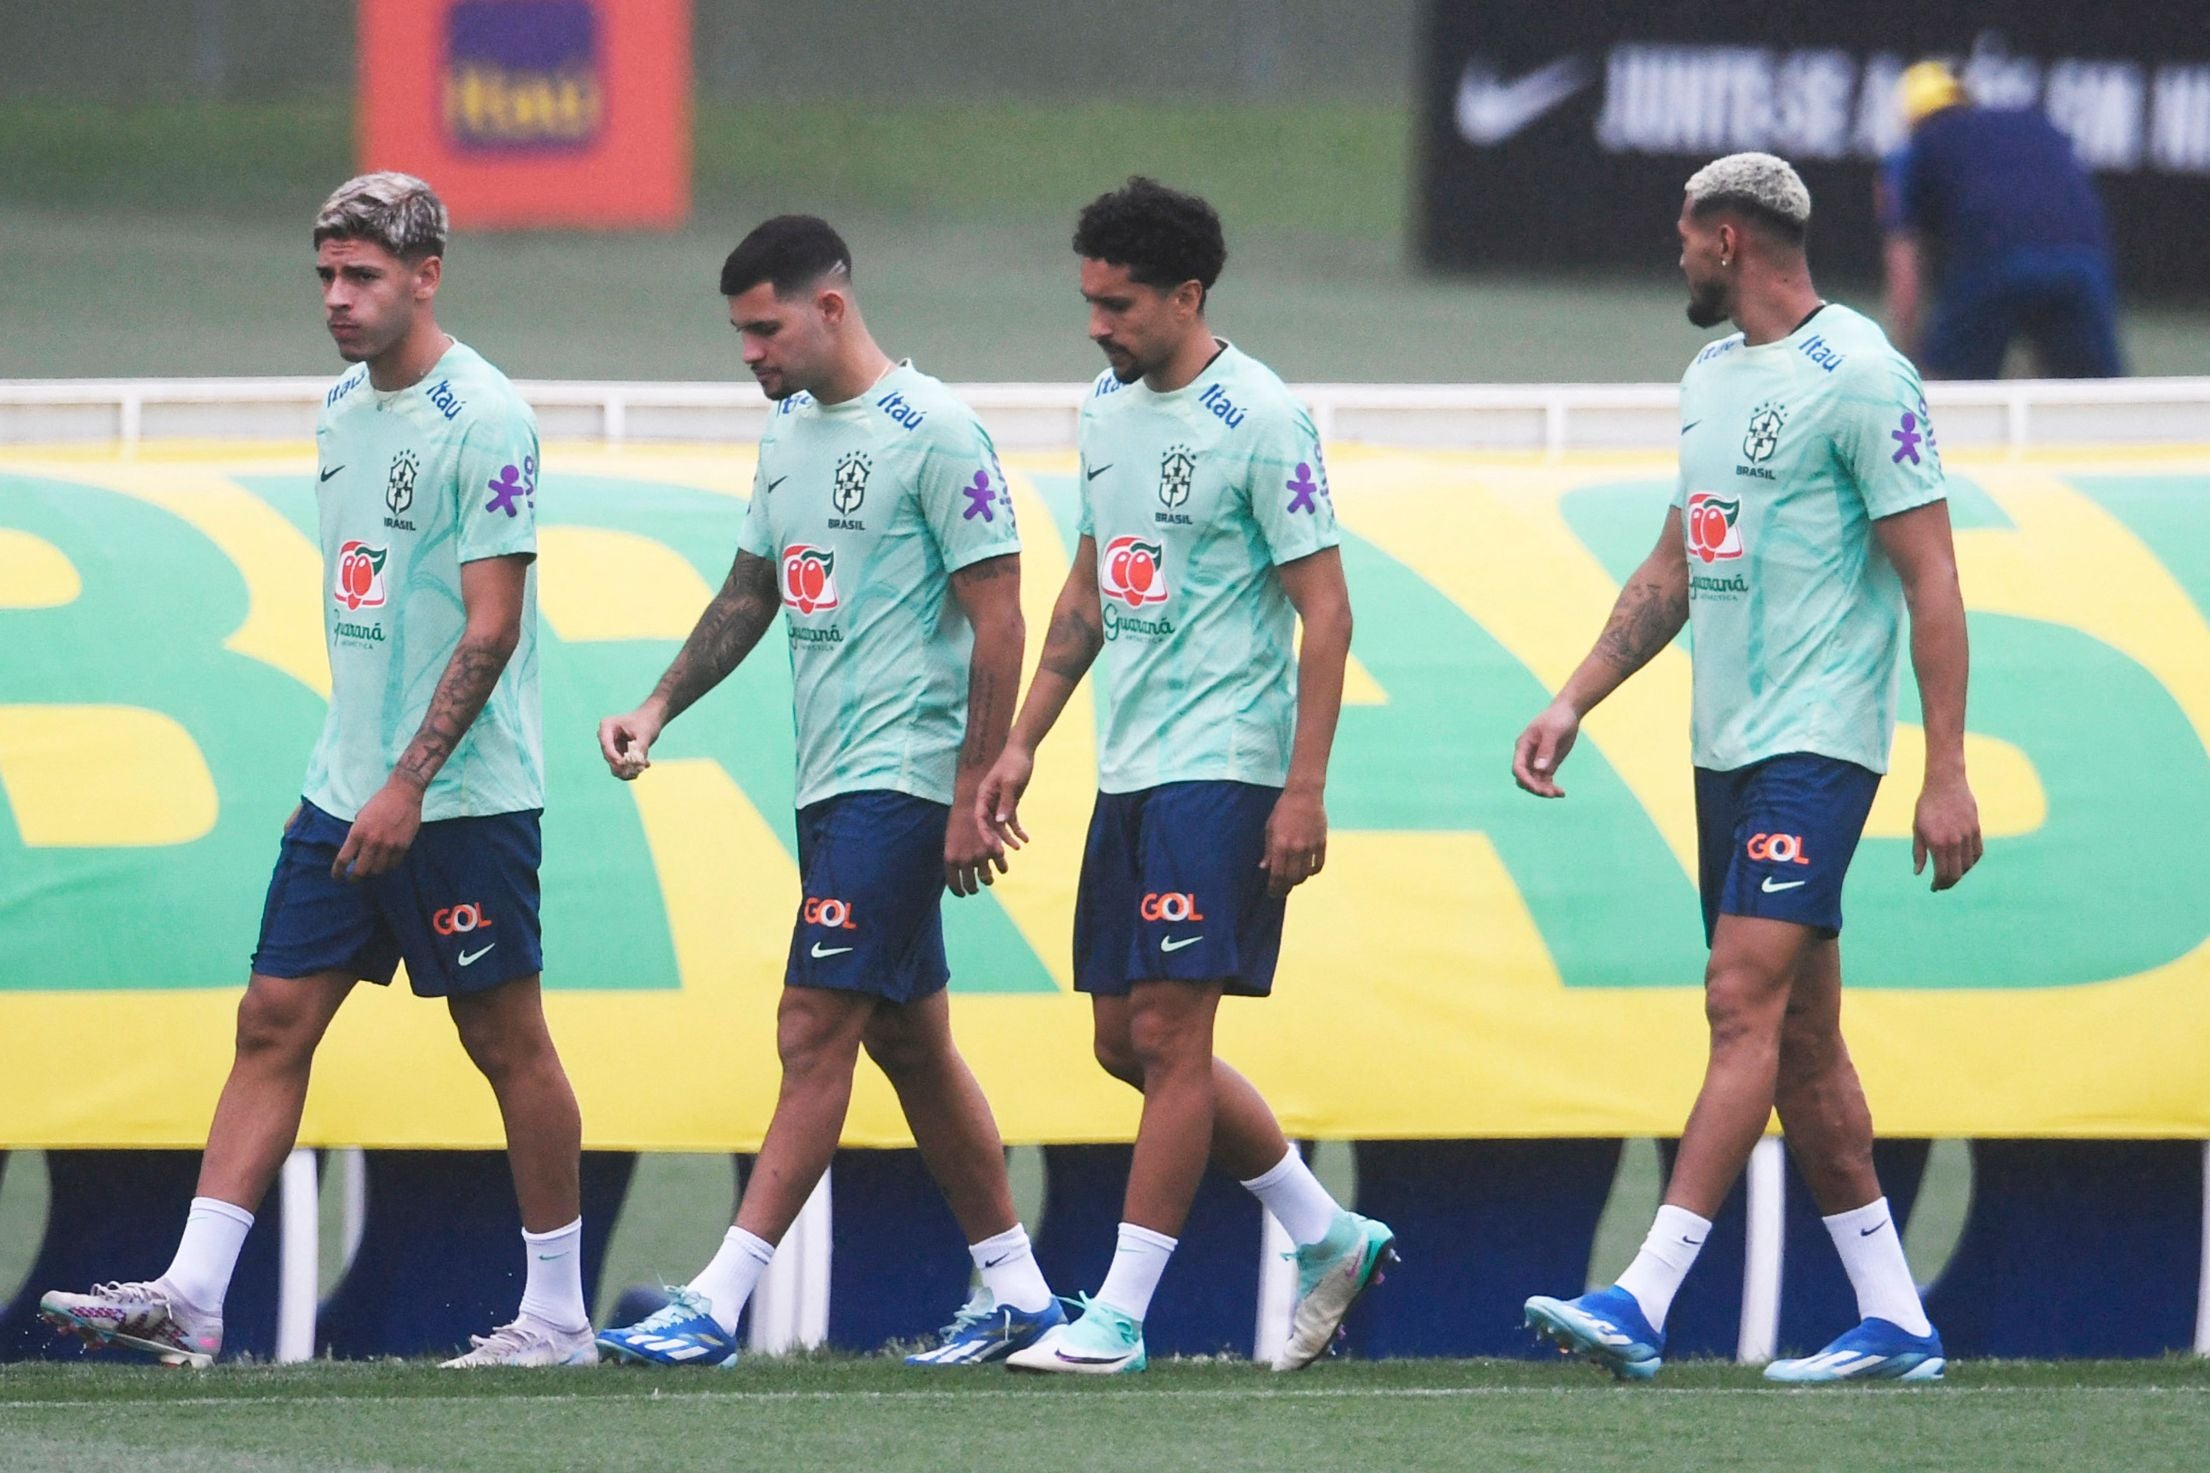 Brazil’s squad is not performing well